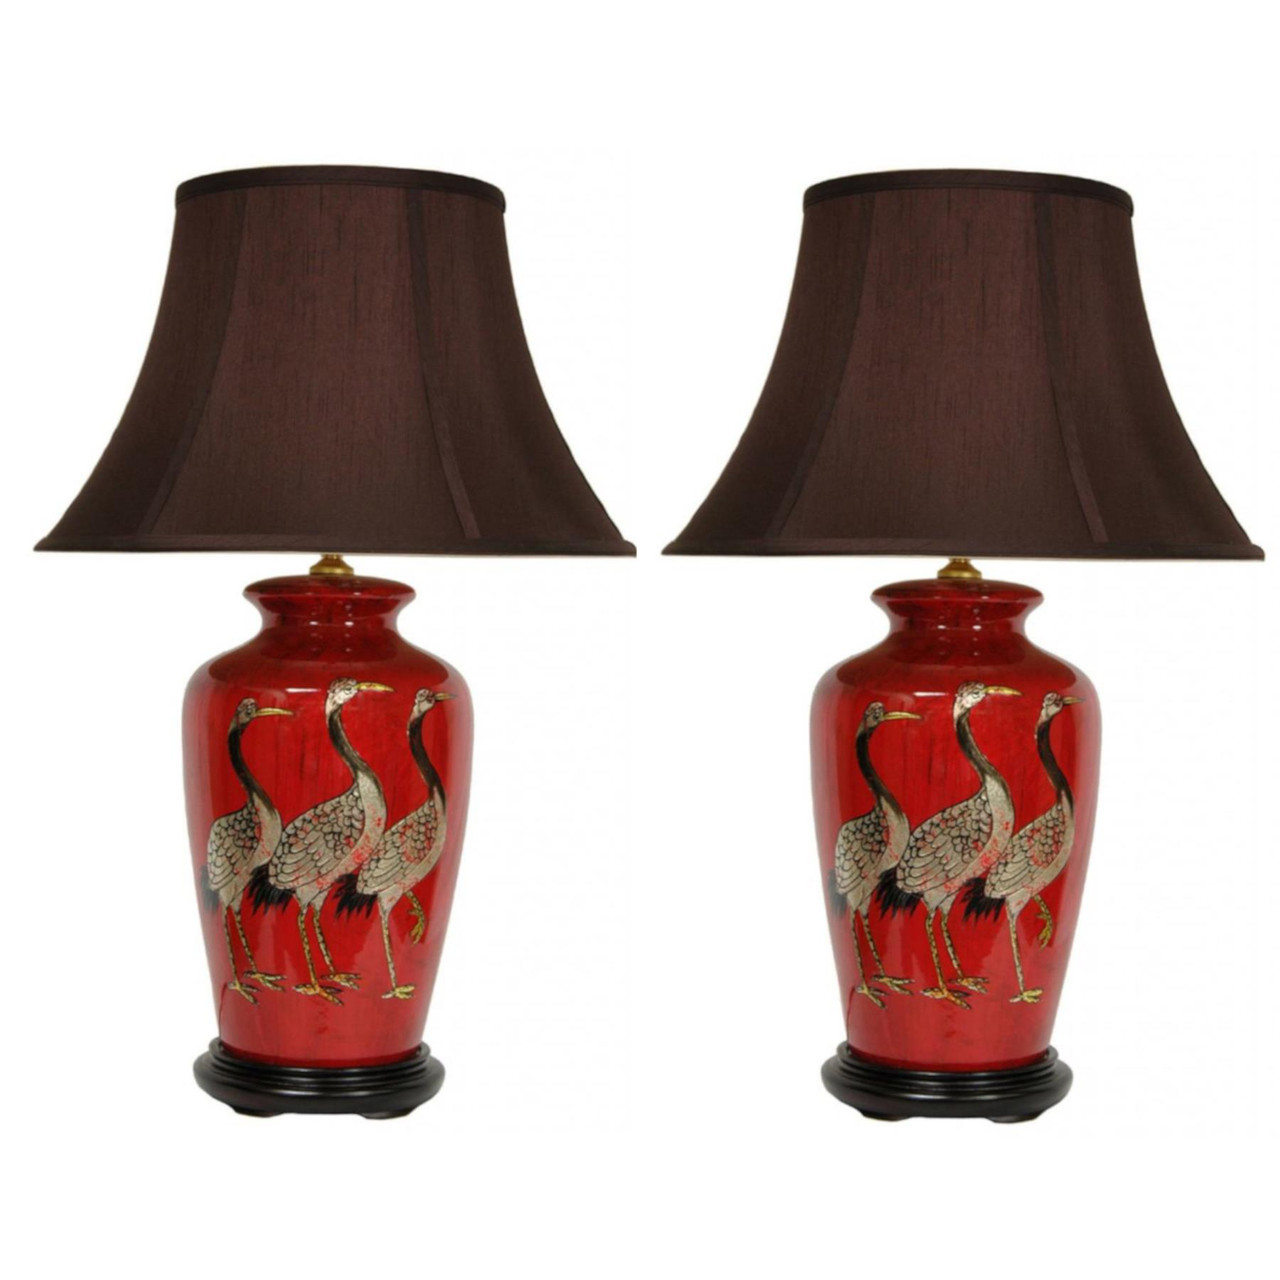 Pair of Chinese Table Lamps with Dark Shades - Red + Golden Cranes Pattern